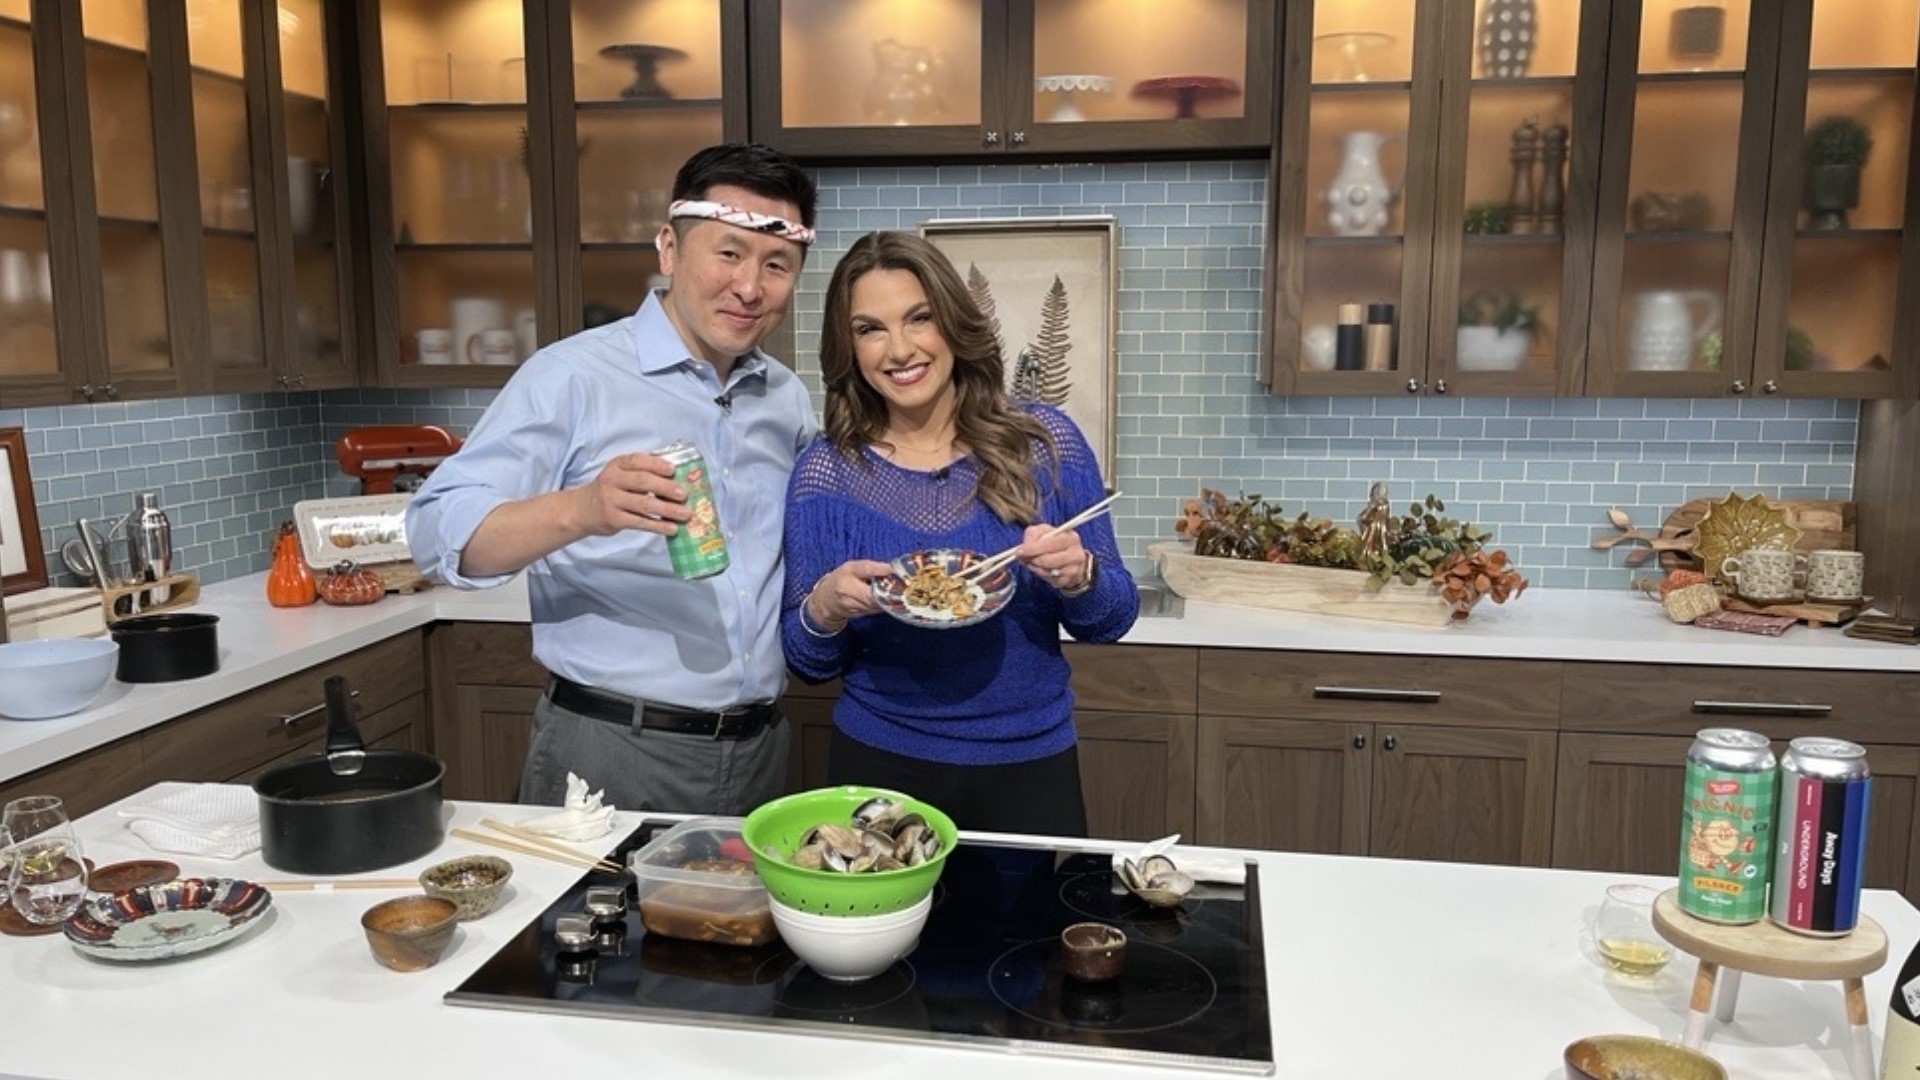 Keiji Tsukasaki from LTD Edition Sushi talks about being one of the New York Times America's 50 Best Restaurants and teaches Amity how to make marinated clams.